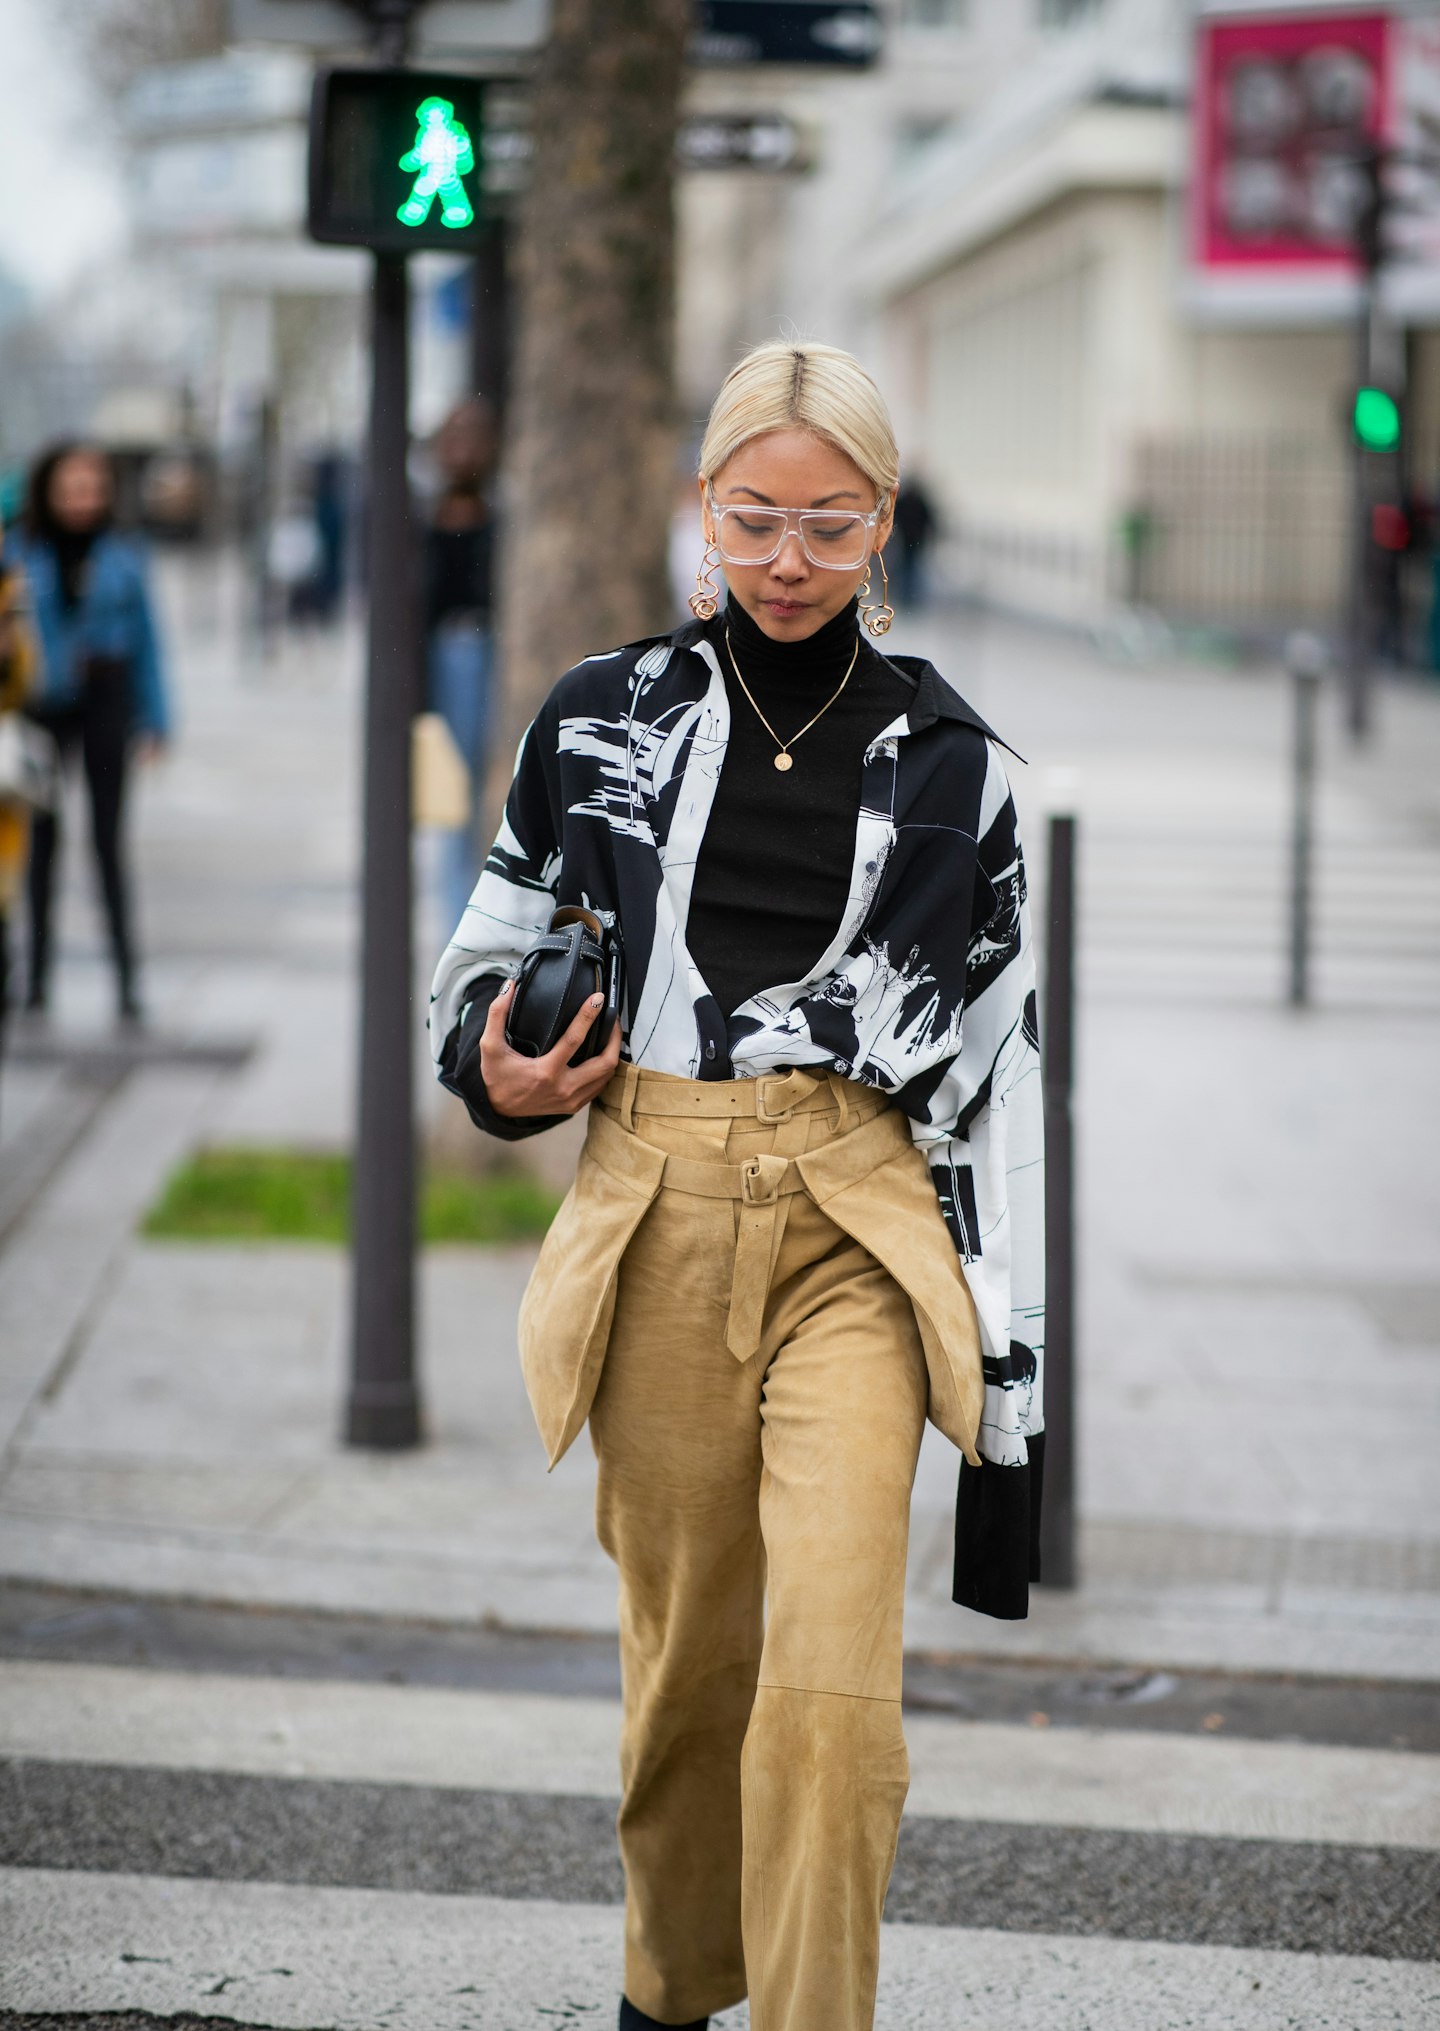 Street style base layer and shirt